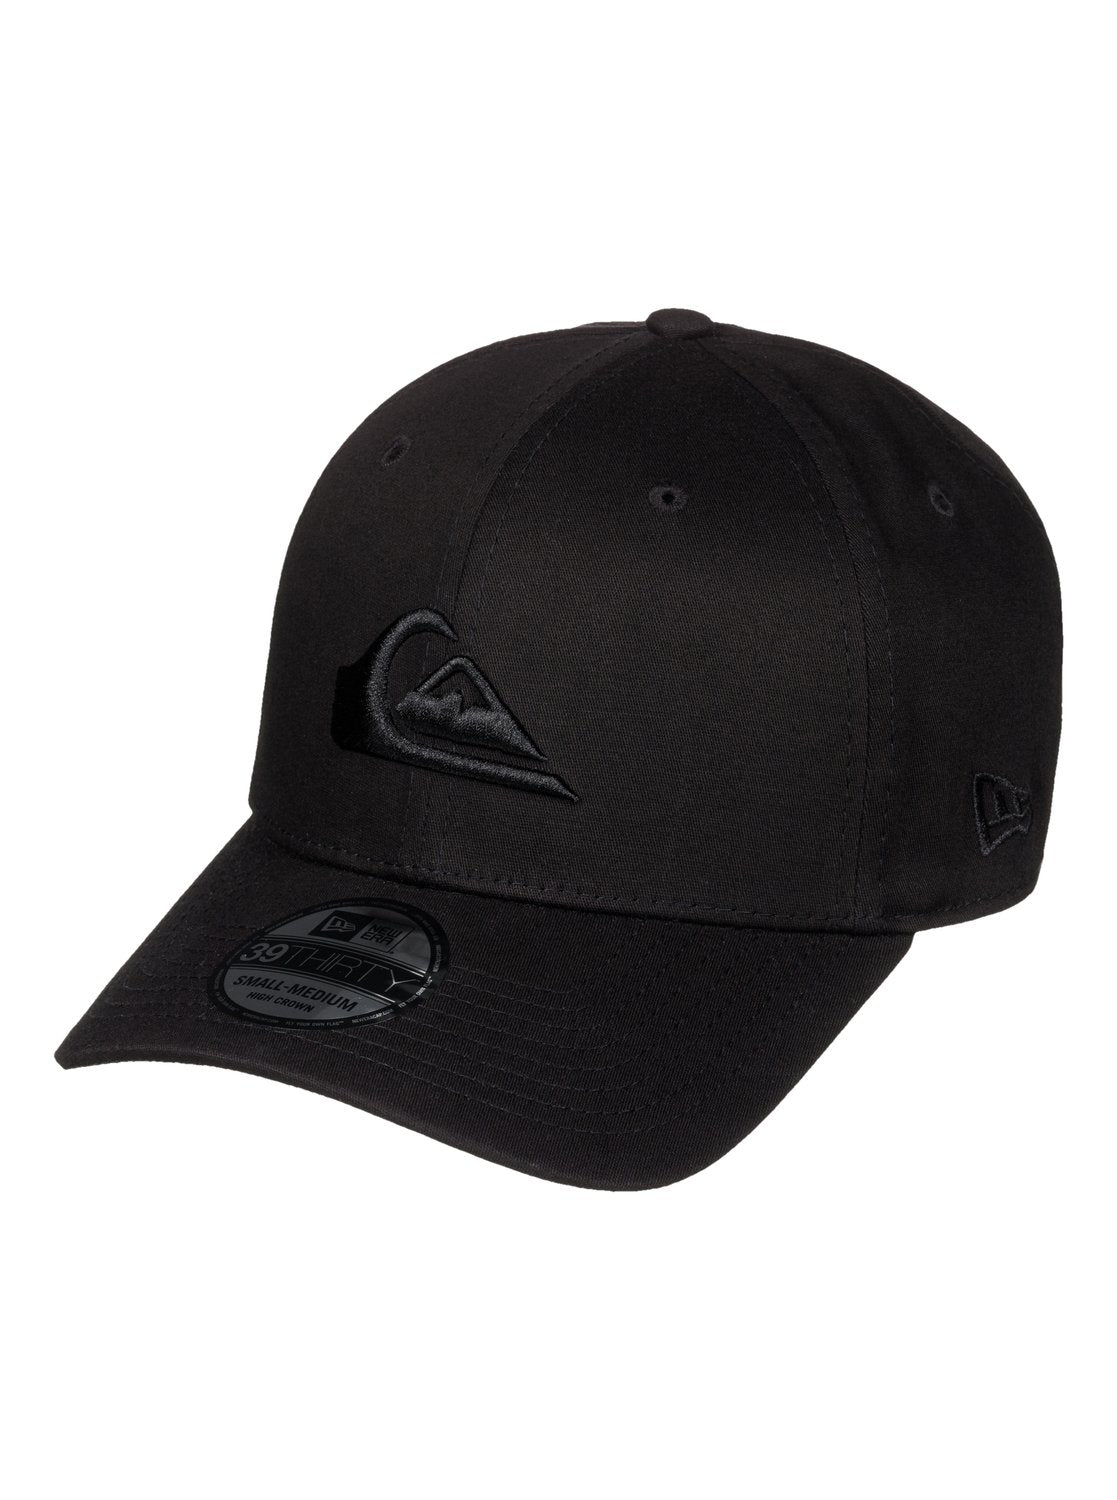 Quiksilver New Era Mountain & Wave Mens Black Stretch Fit Cap AQYHA034 –  West French